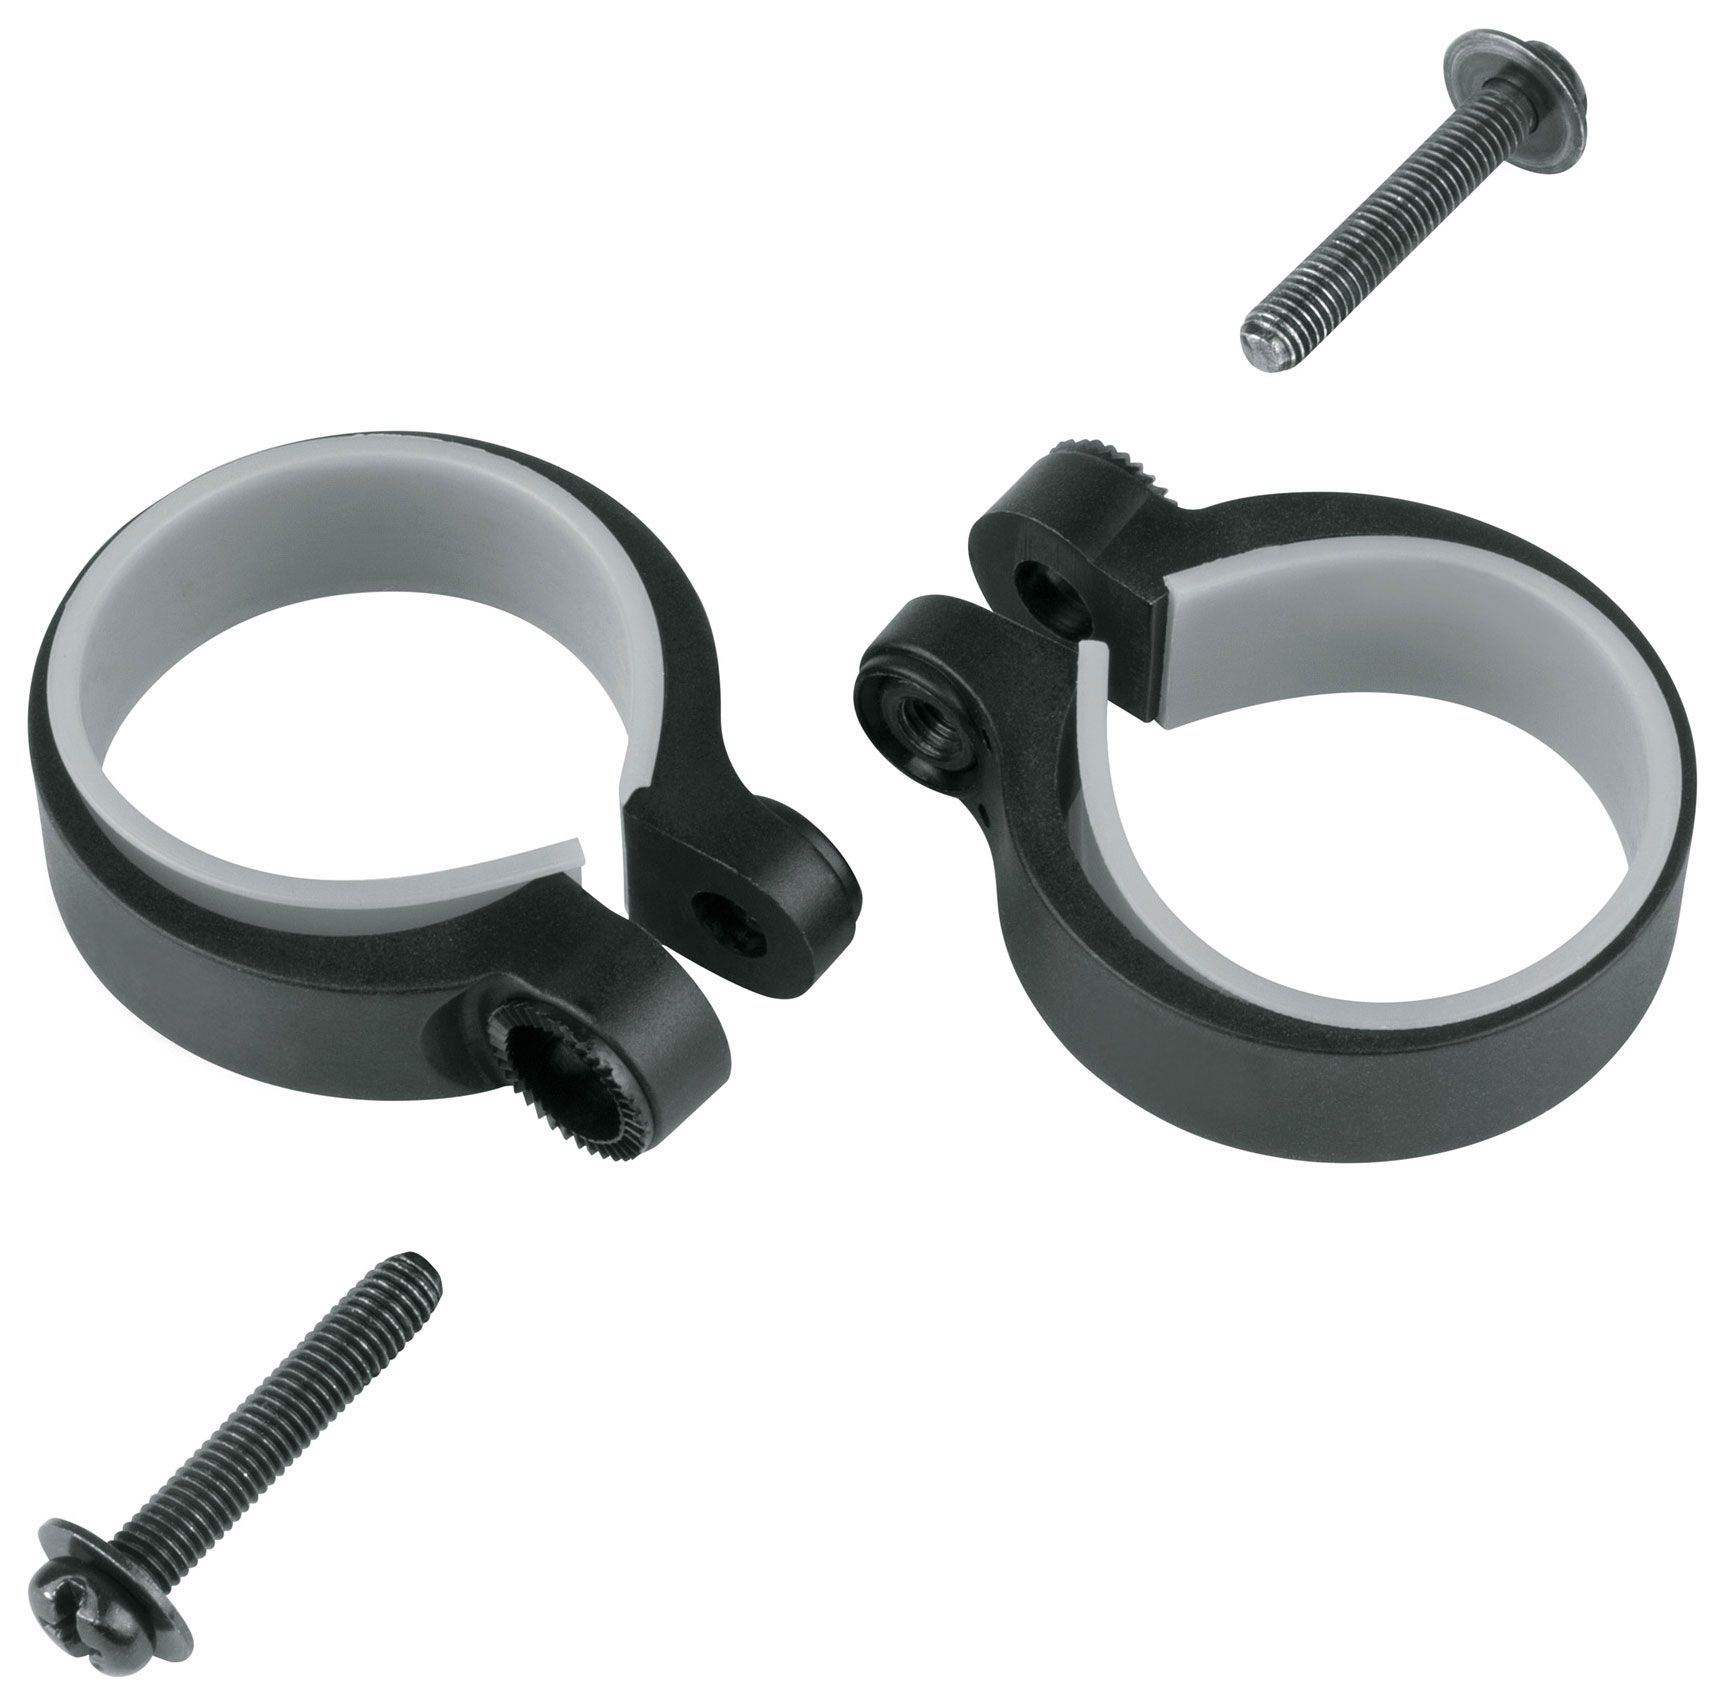  Хомут для велосипеда SKS Stay Mounting Clamps 2 Pcs. 31,0 - 34,5Mm (SKS-11483)